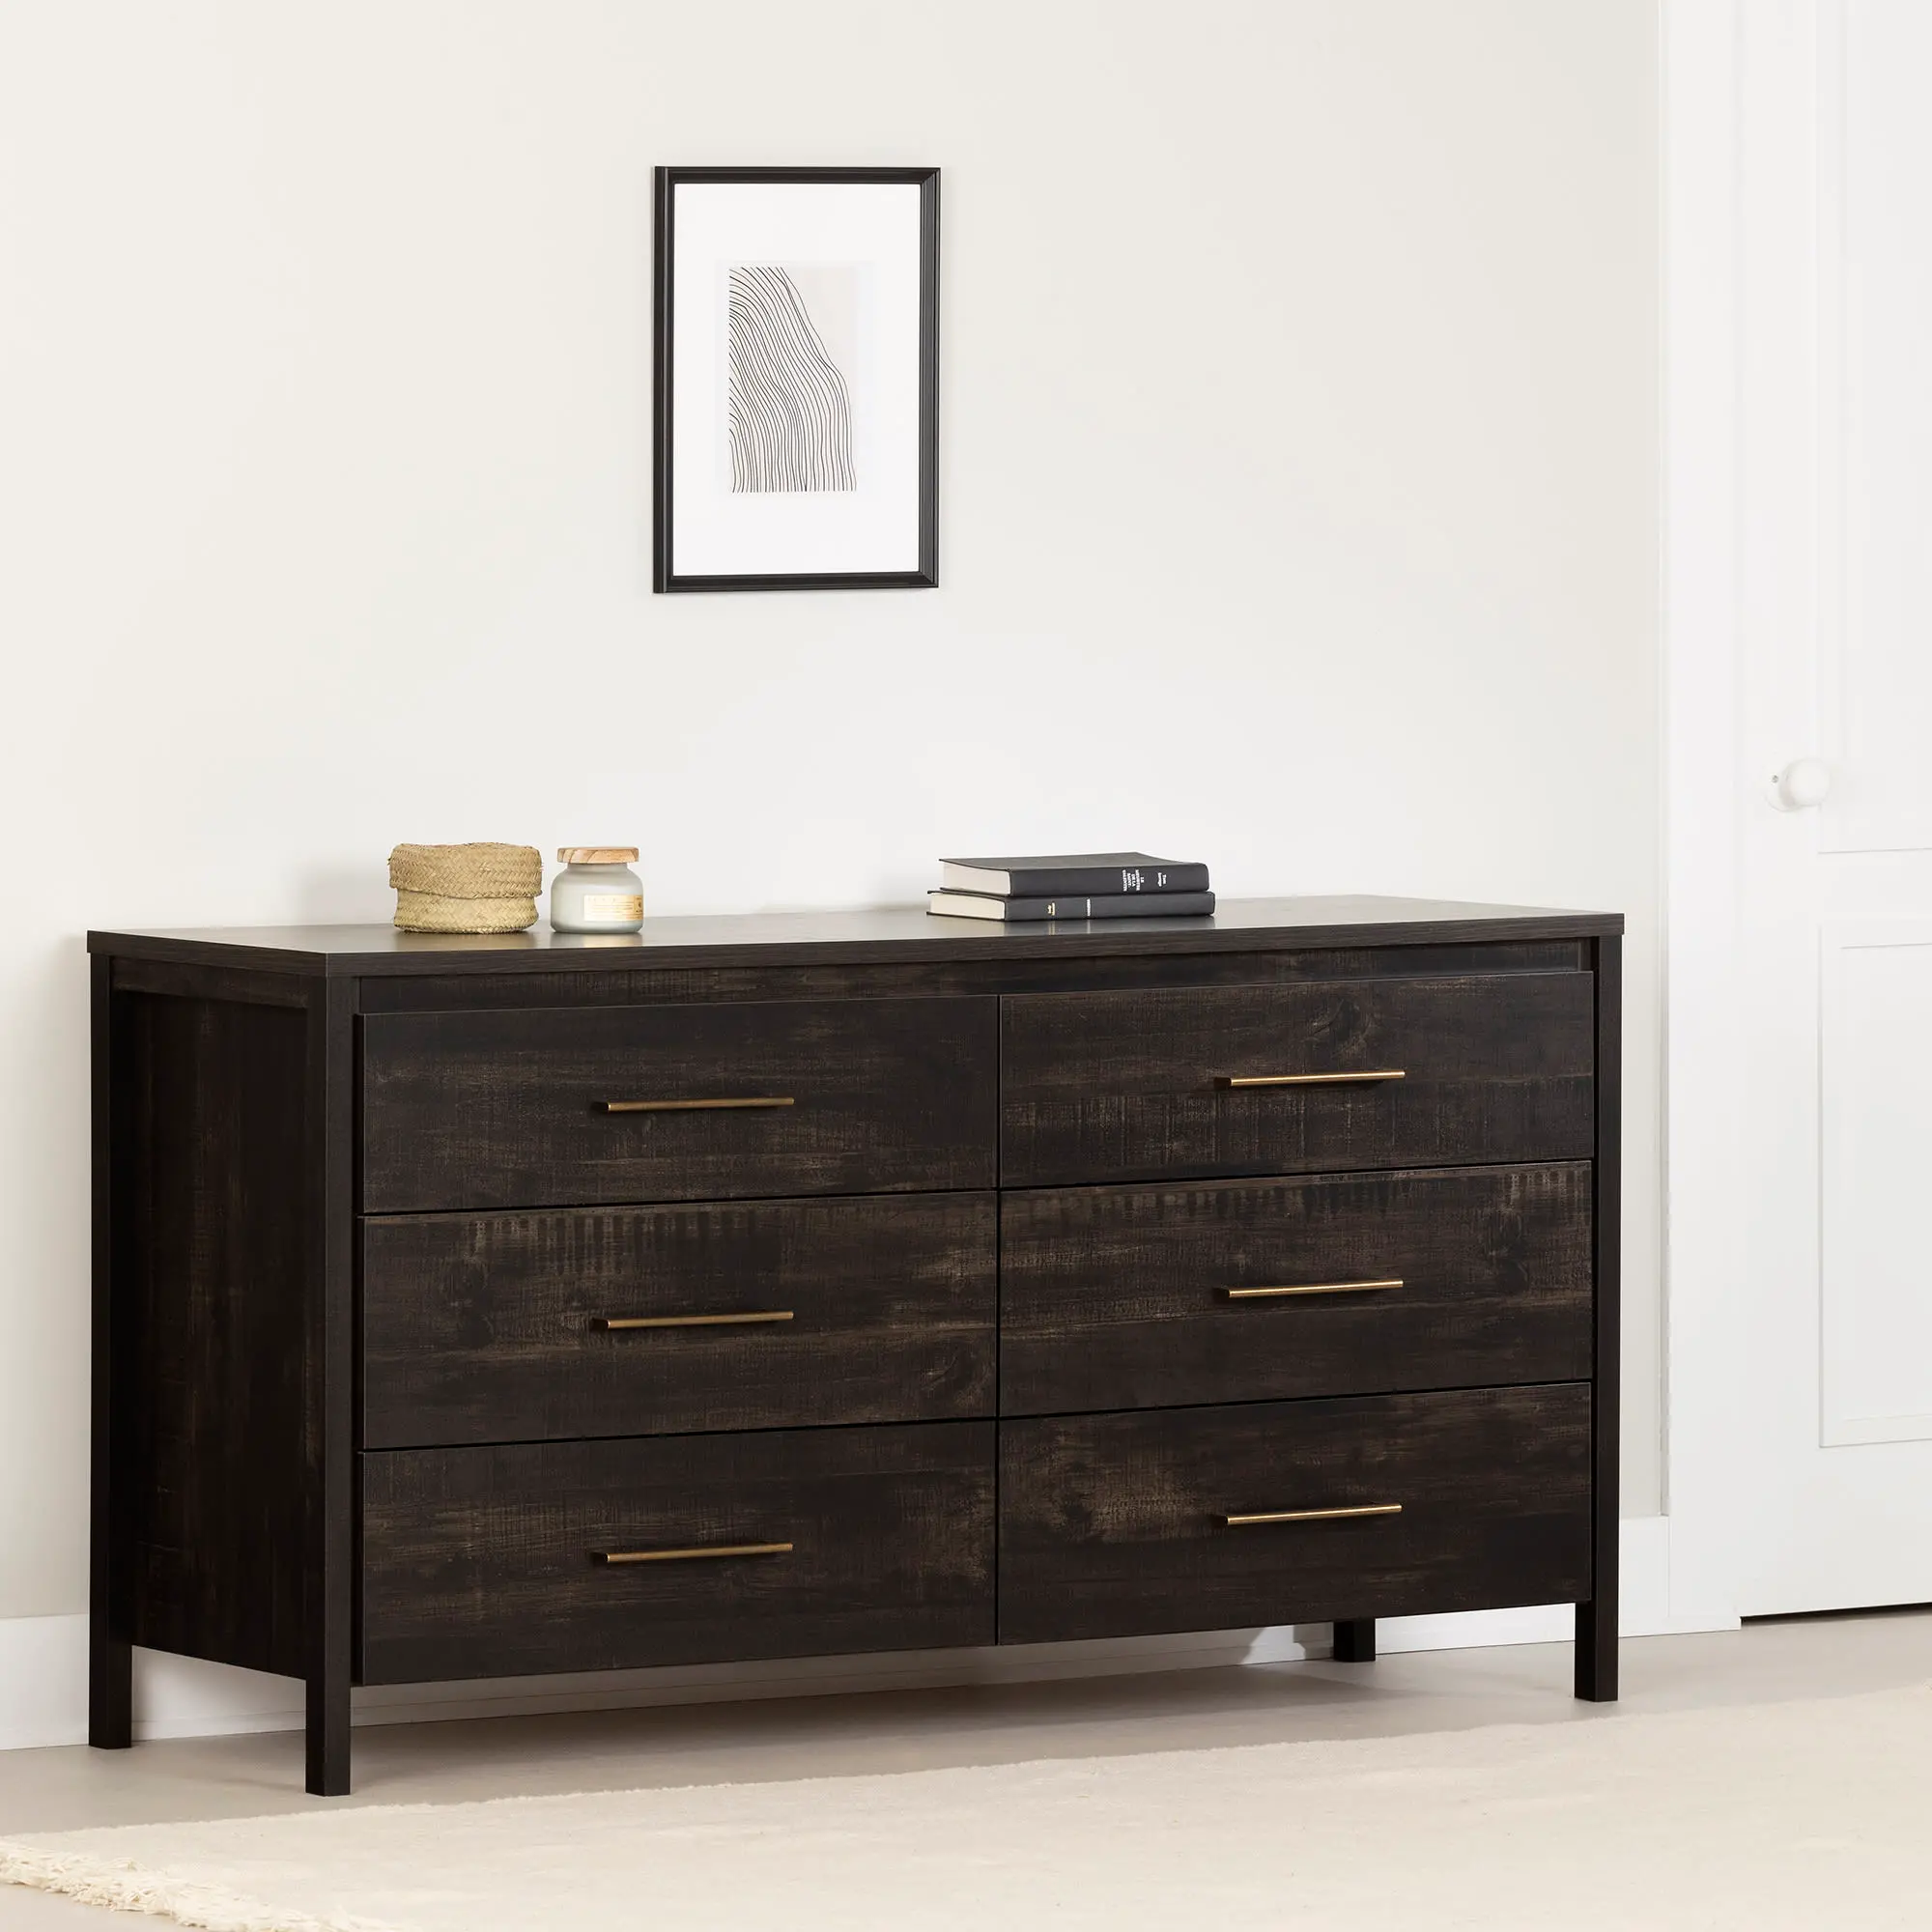 Photos - Dresser / Chests of Drawers South Shore Gravity Rubbed Black 6 Drawer Dresser - South Shore 13557